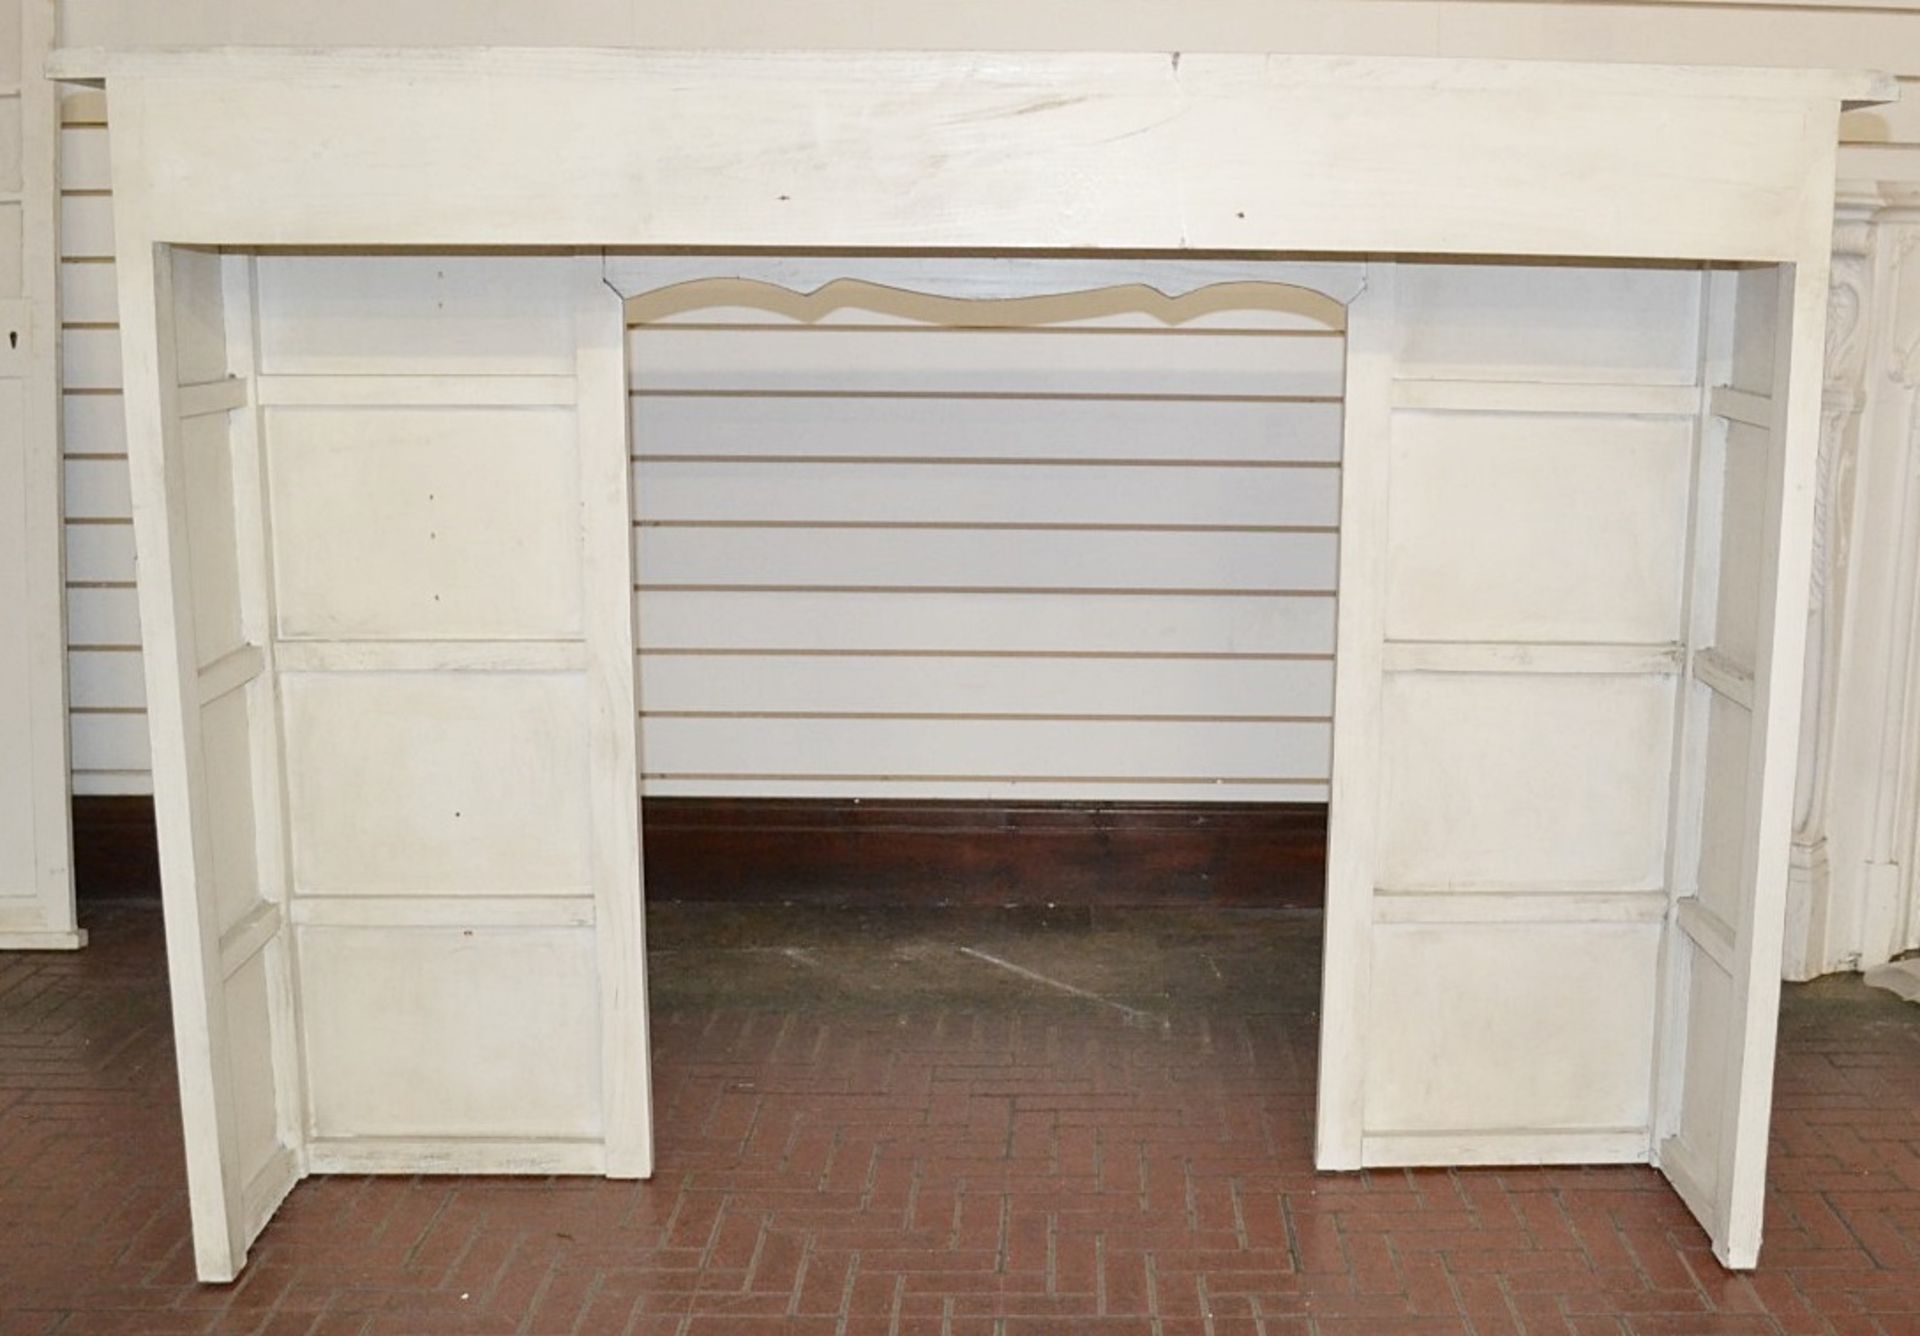 1 x Wooden Fireplace In Cream With An Aged Finish - Dimensions: W170 x D36 x H126cm - Ref BB900 / KS - Image 2 of 4